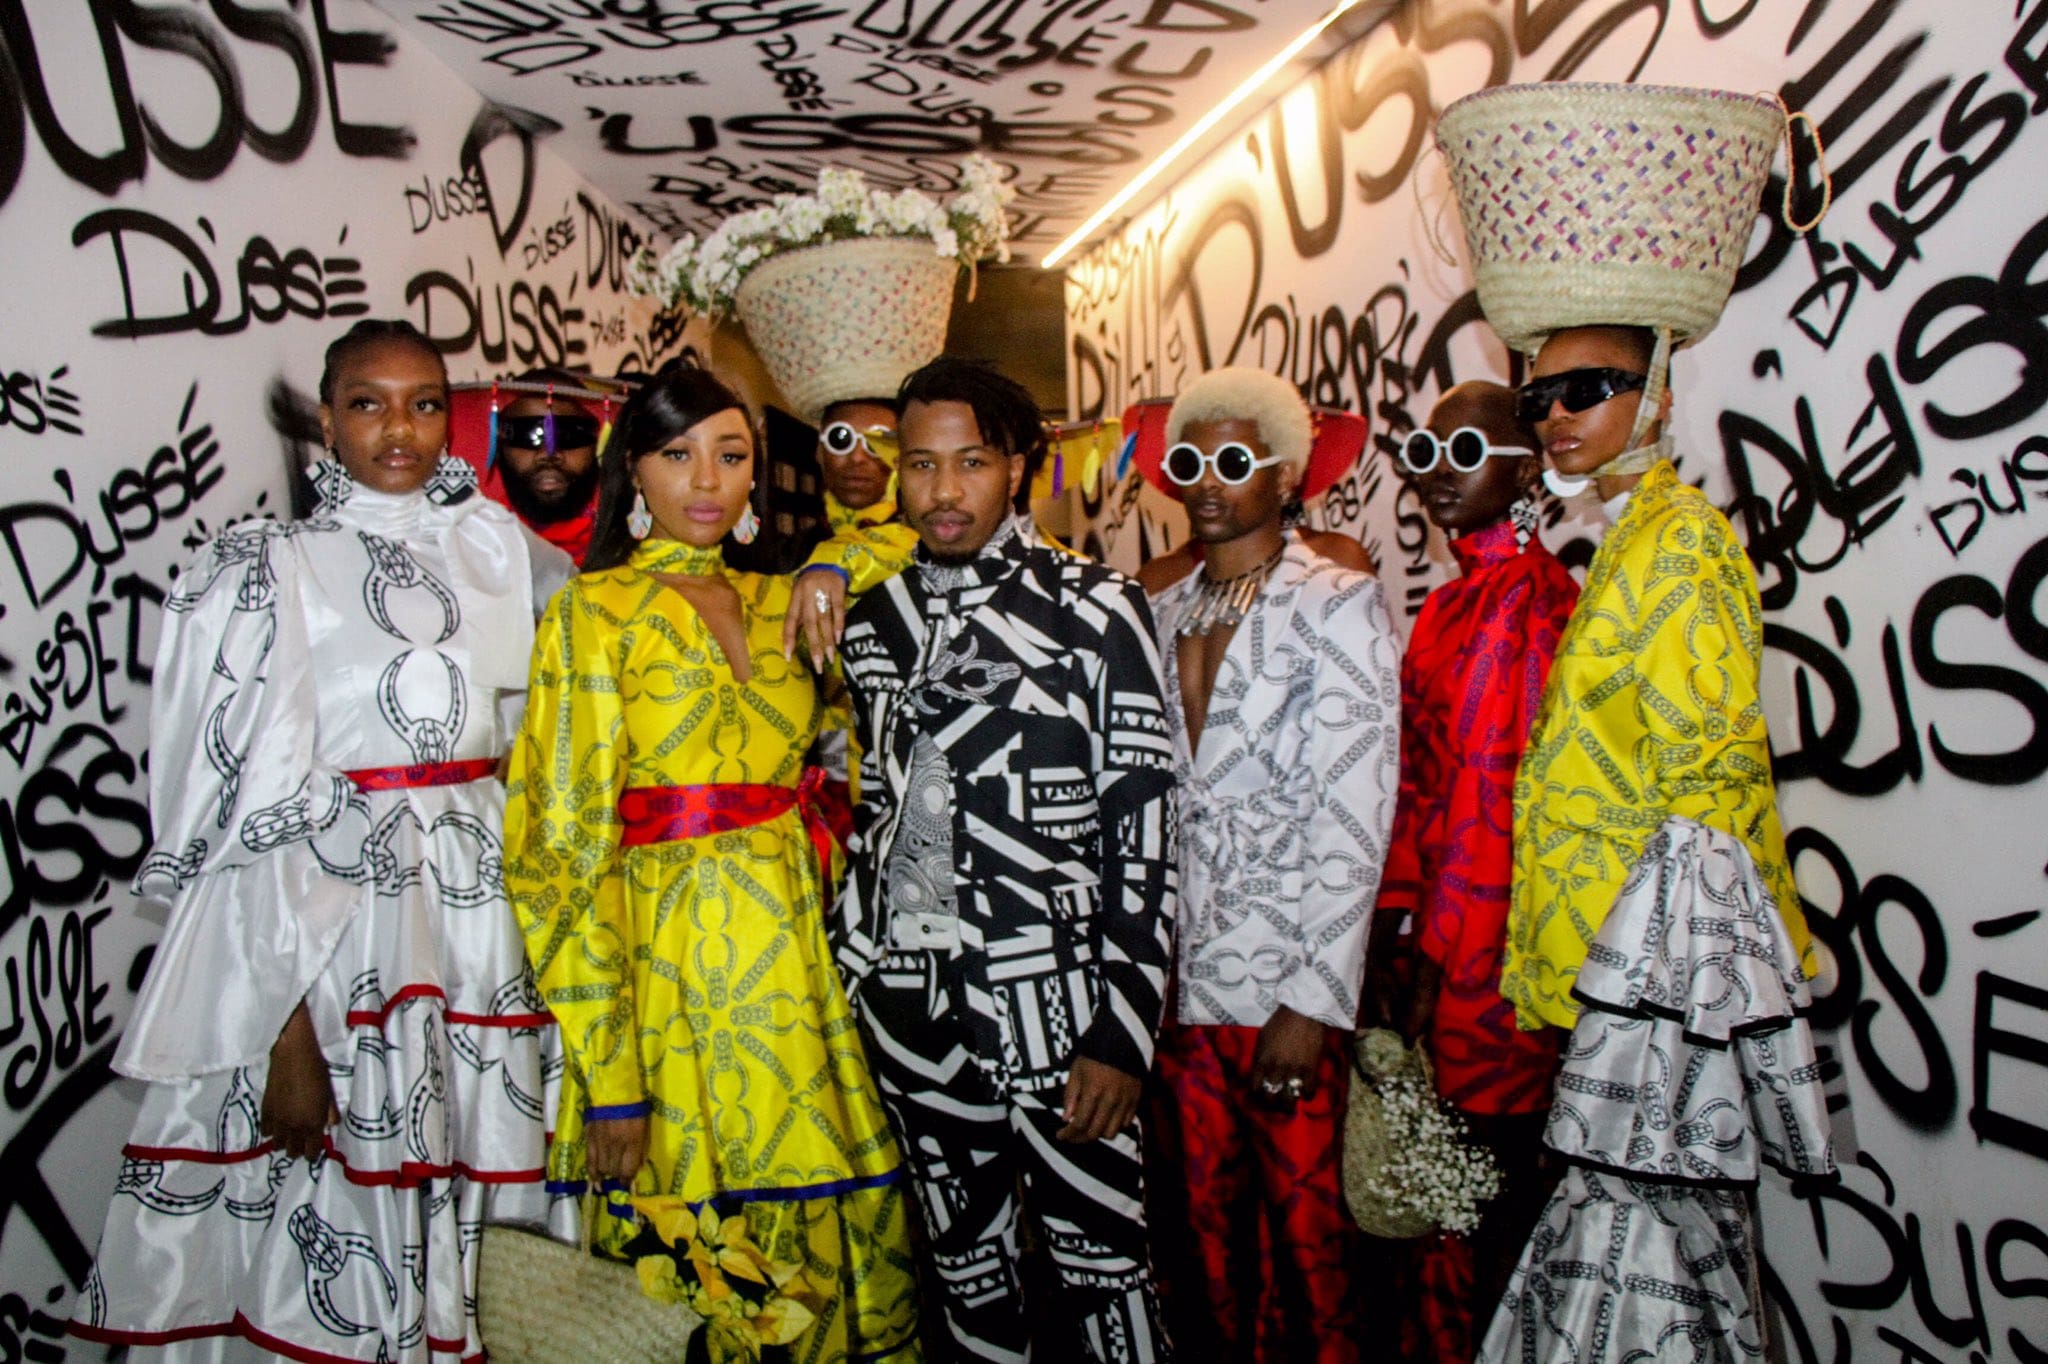 South Africa fashion is going local, and it’s a good thing